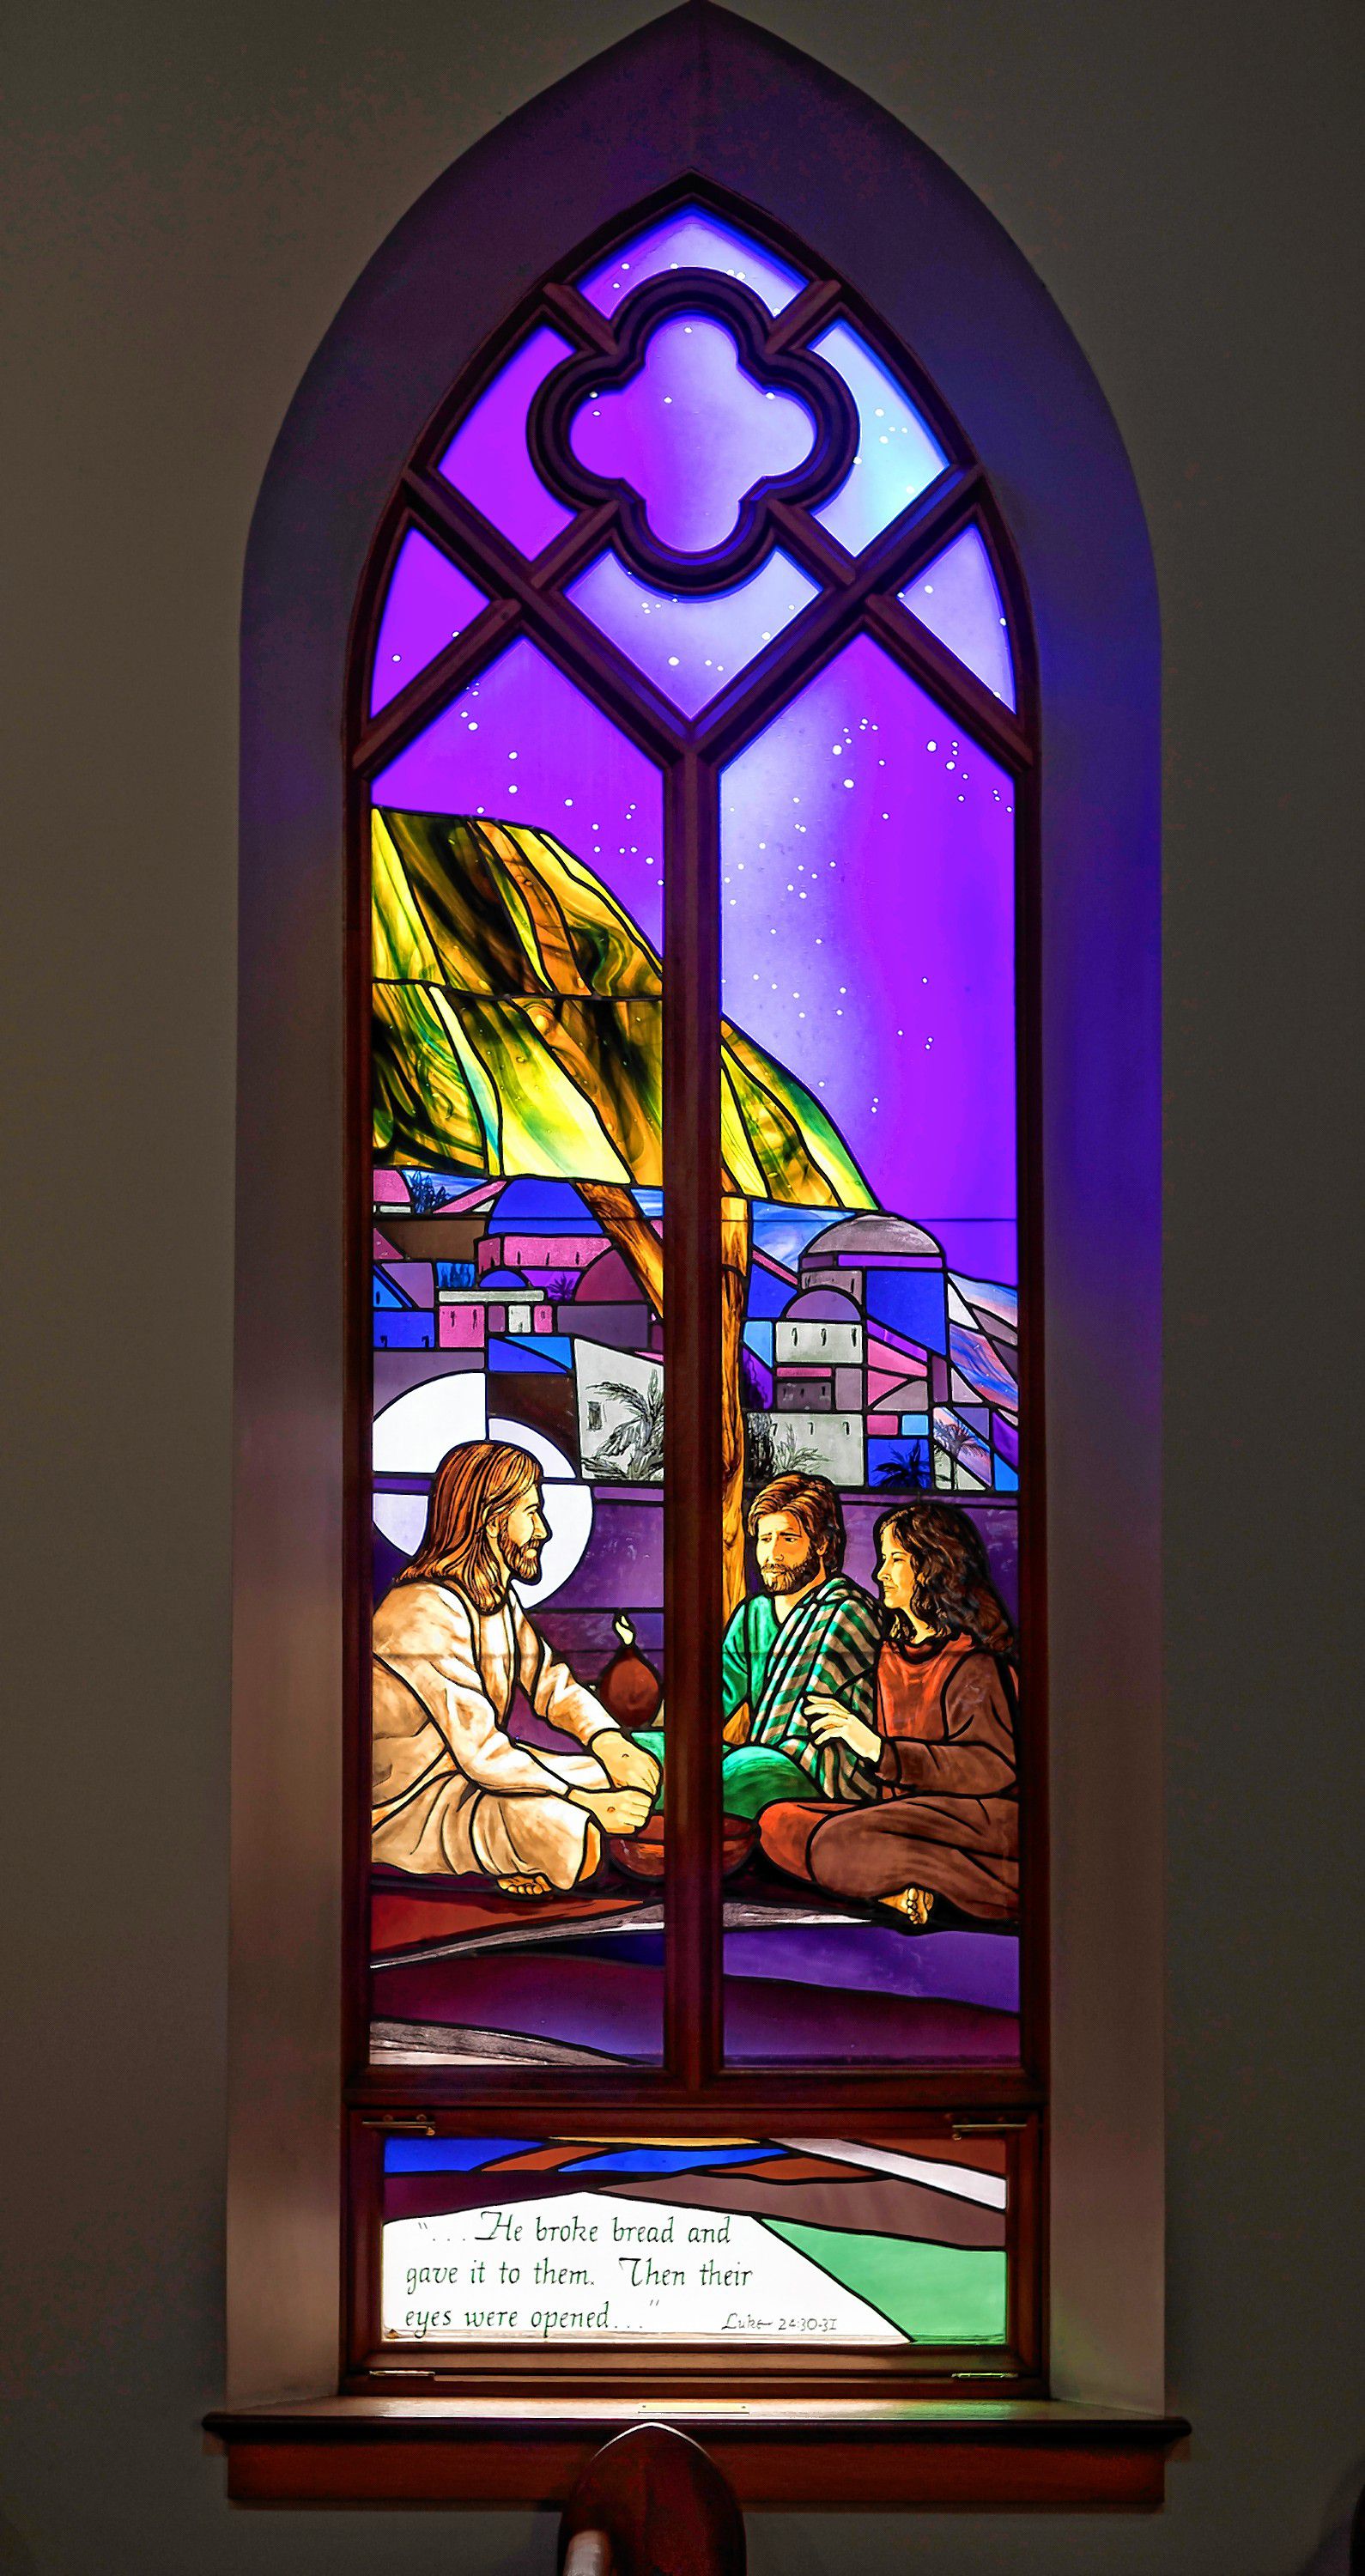 One of the stained glass windows inside St. Paul’s Episcopal Church in downtown Concord.